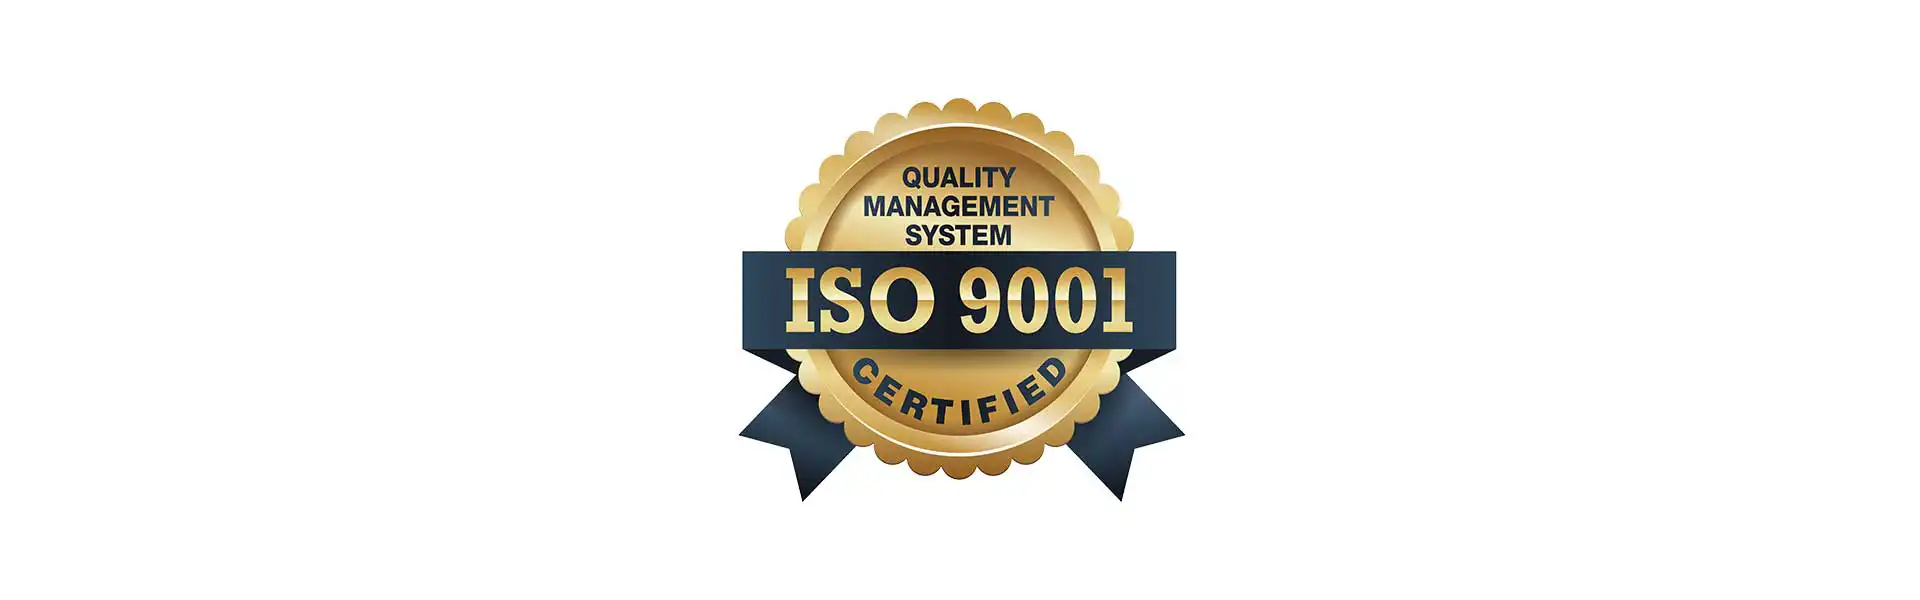 ISO 900 Quality Management System